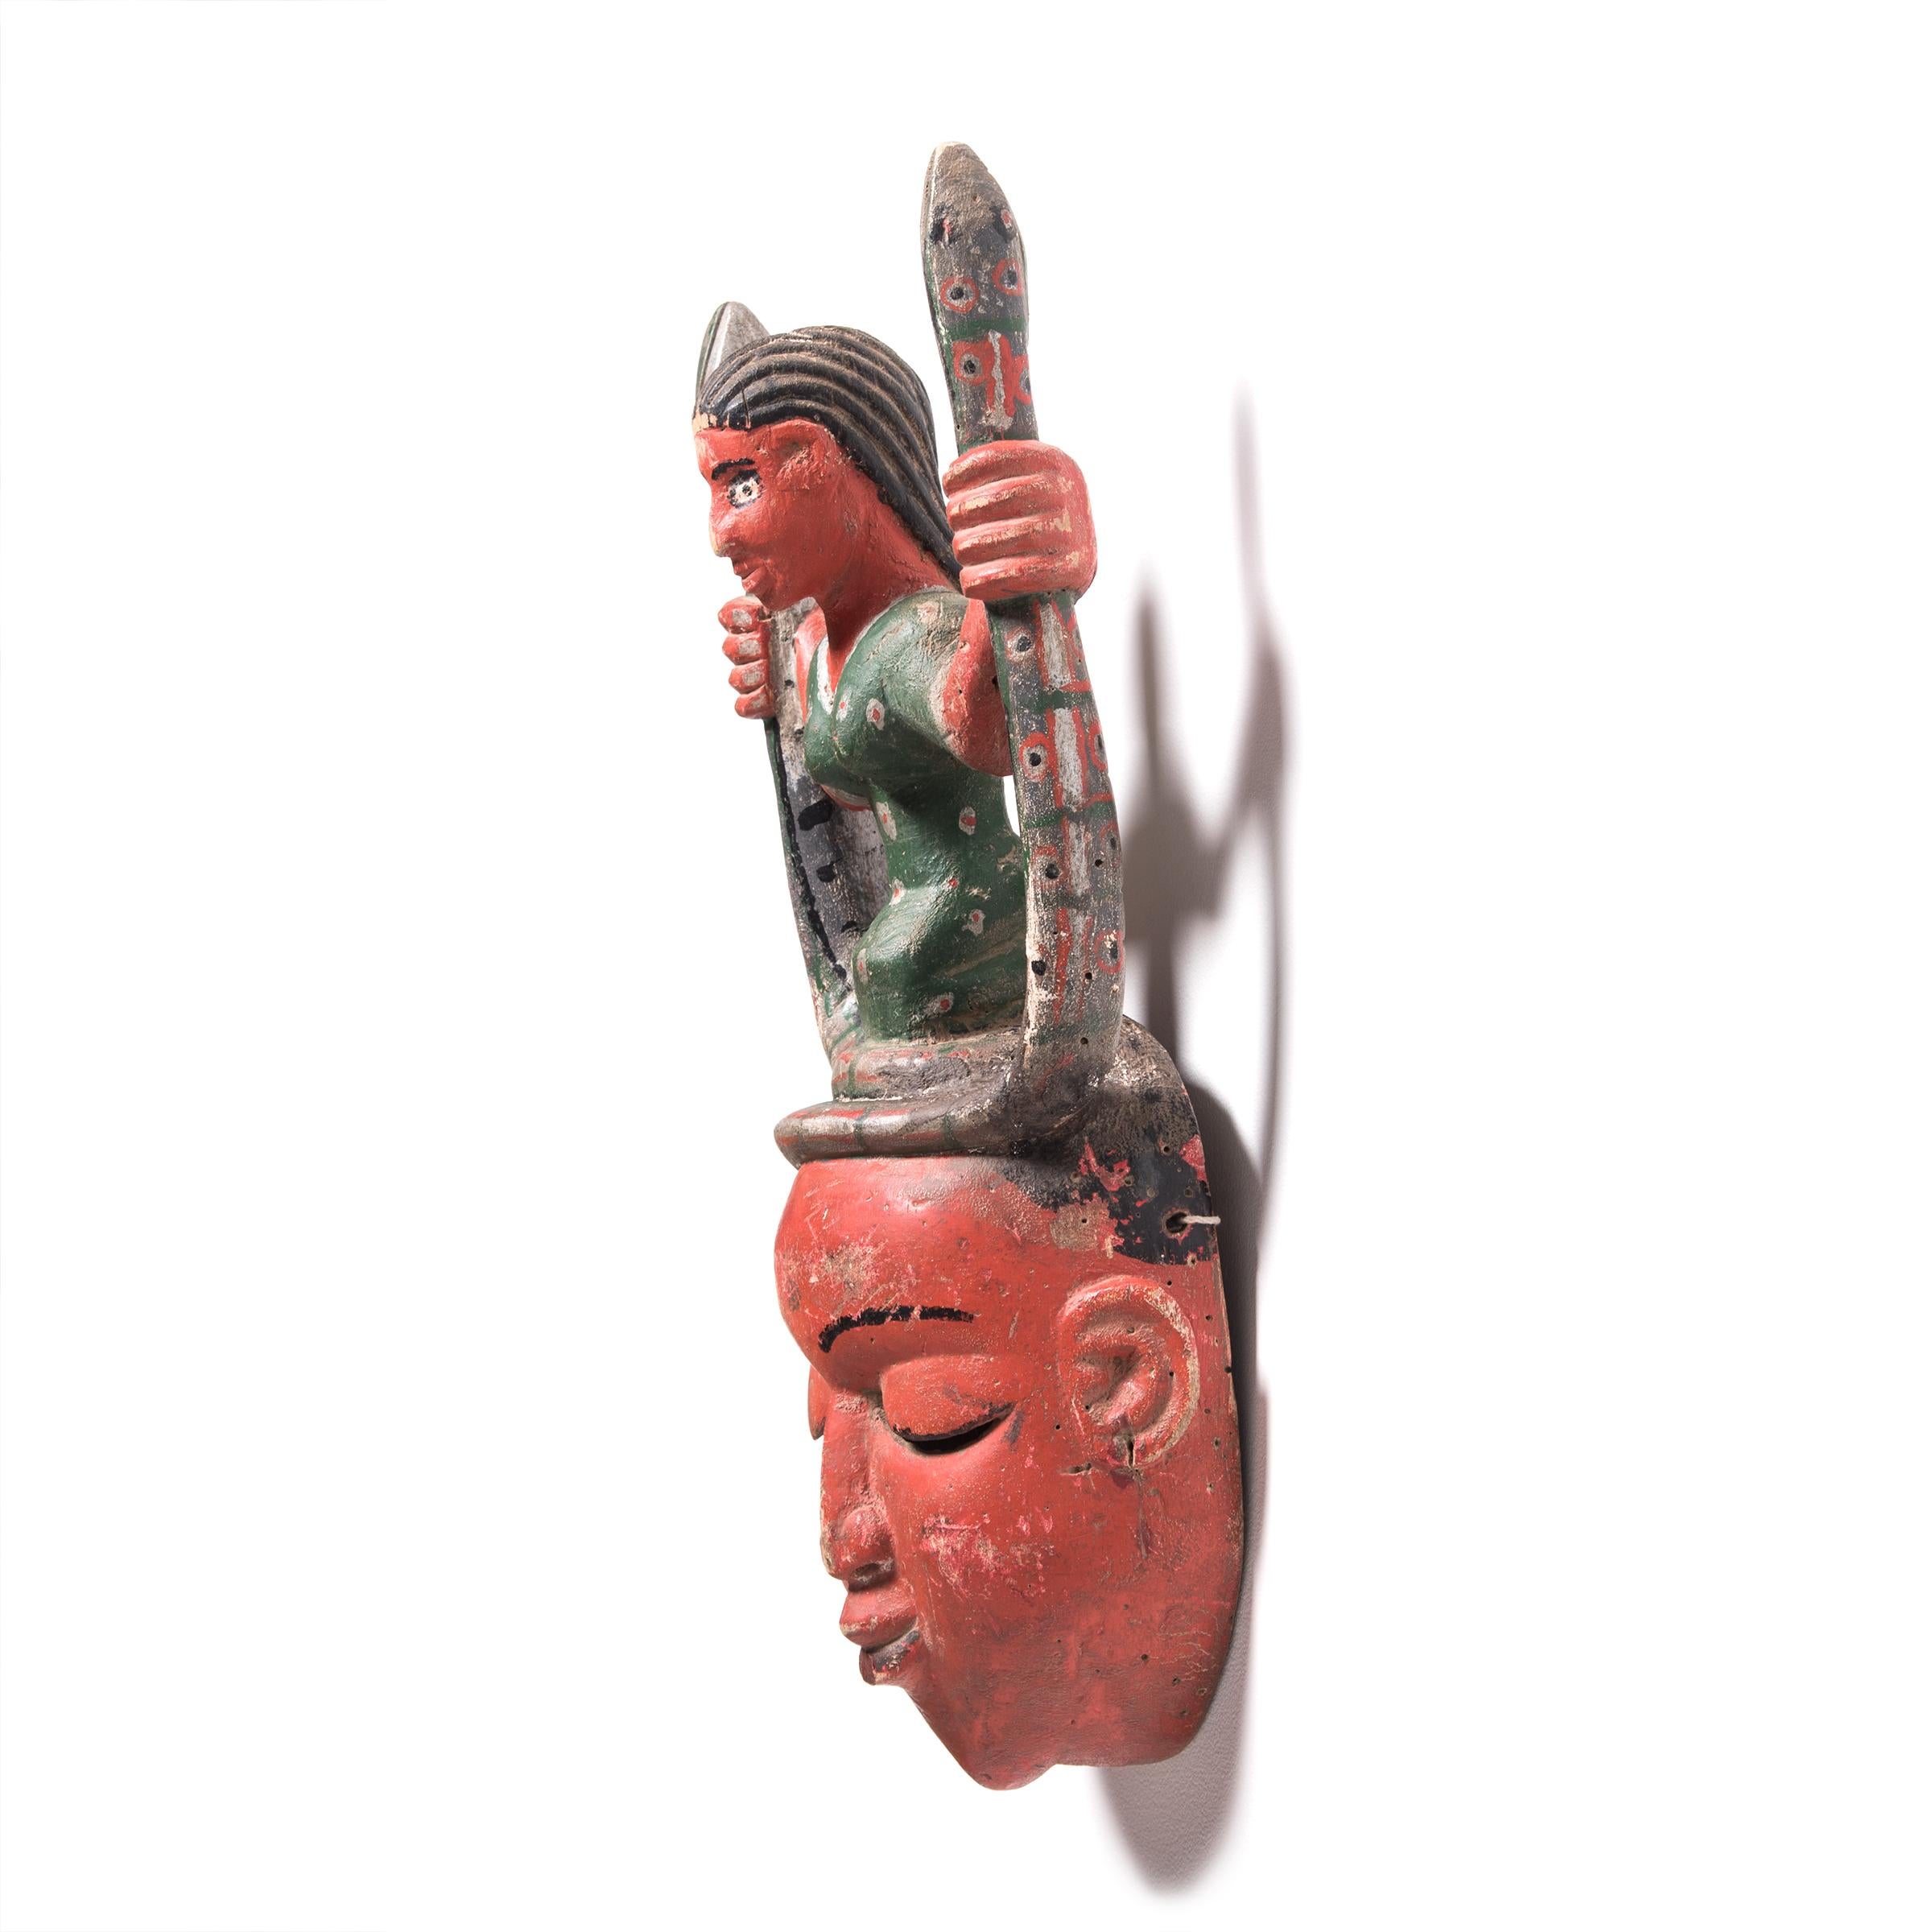 This brightly-colored painted mask is a dance mask attributed to the Guro peoples of Côte d'Ivoire. The mask depicts Mami Wata, or 